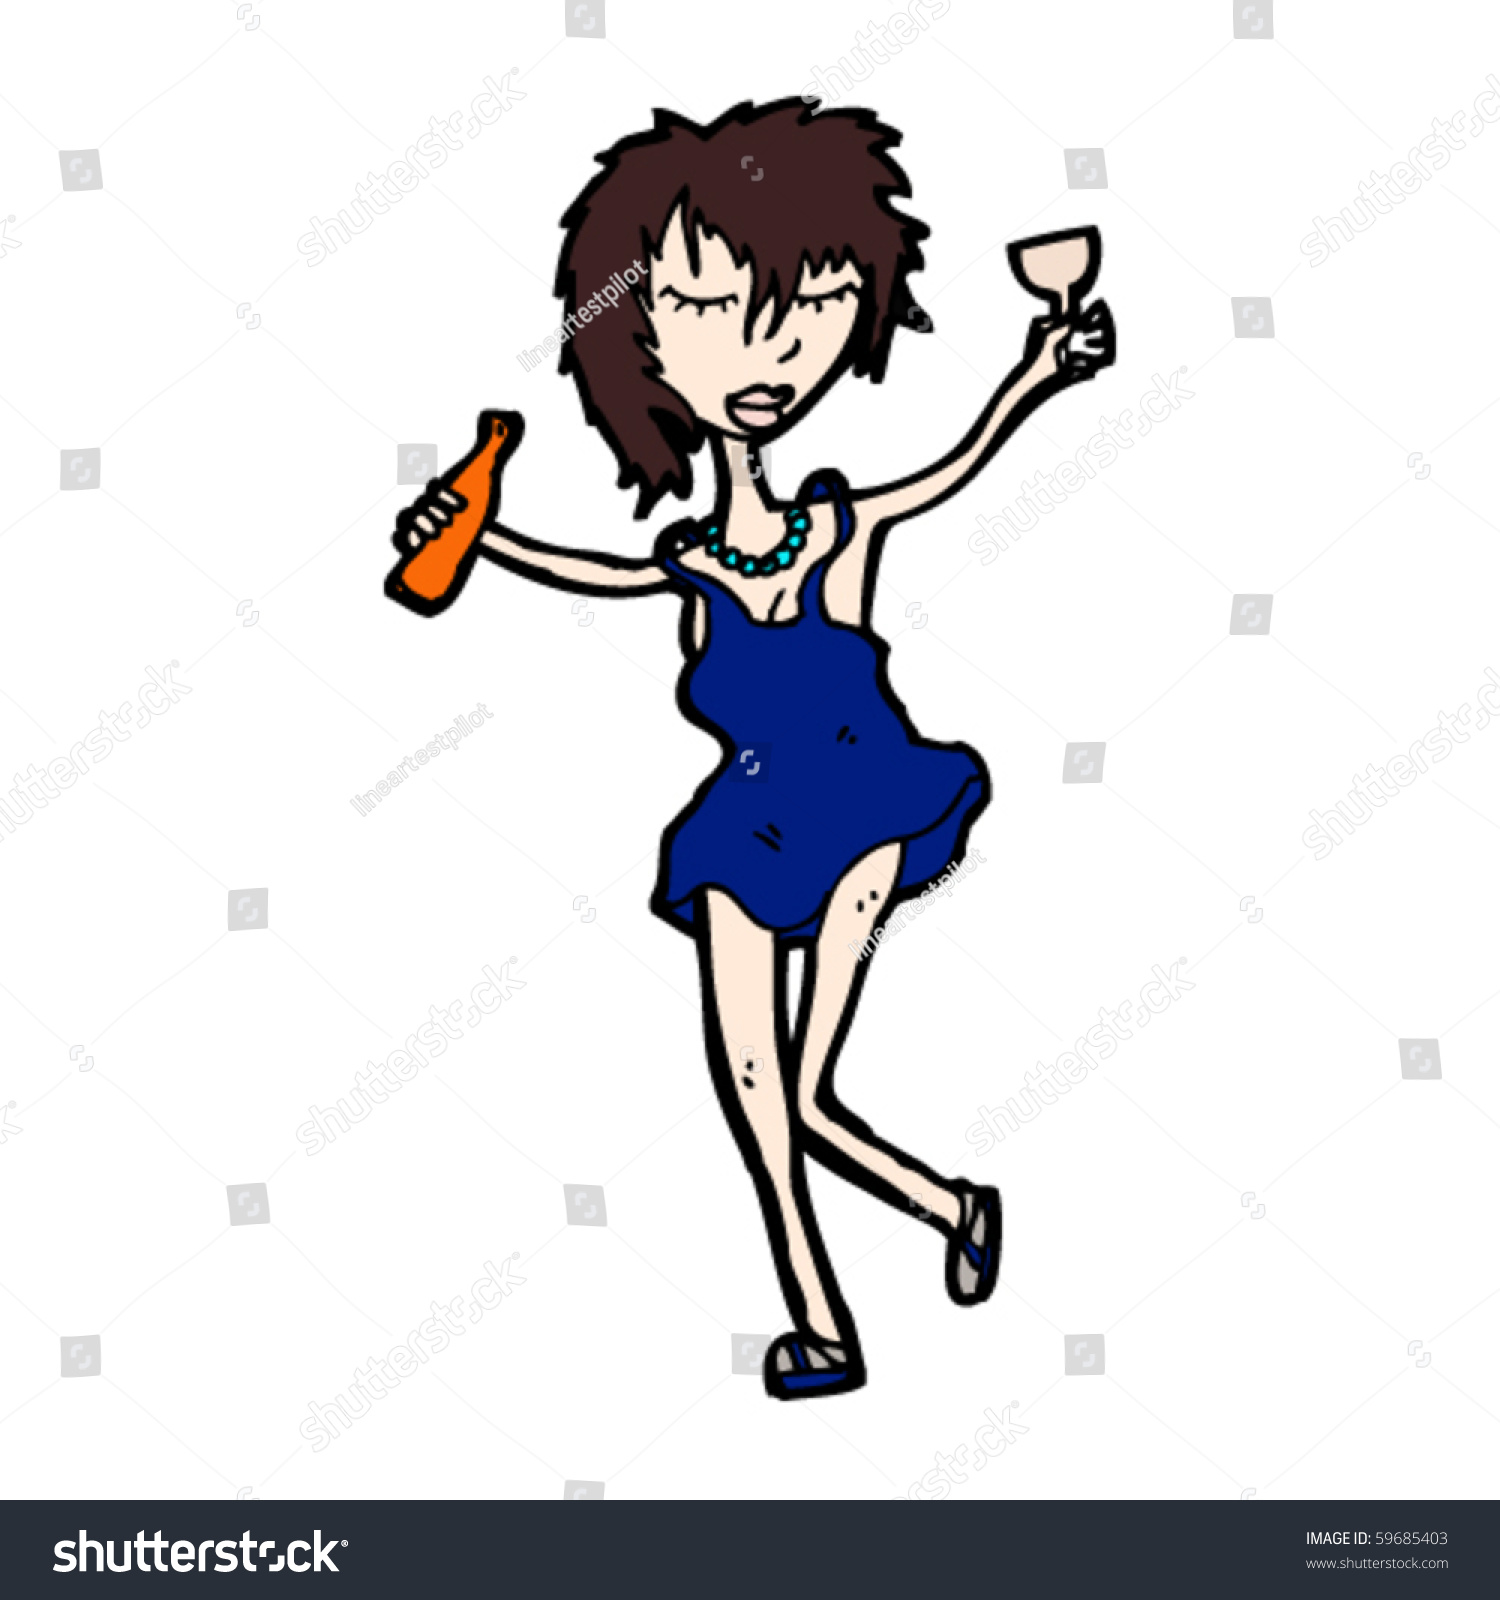 funny drunk clipart - photo #42